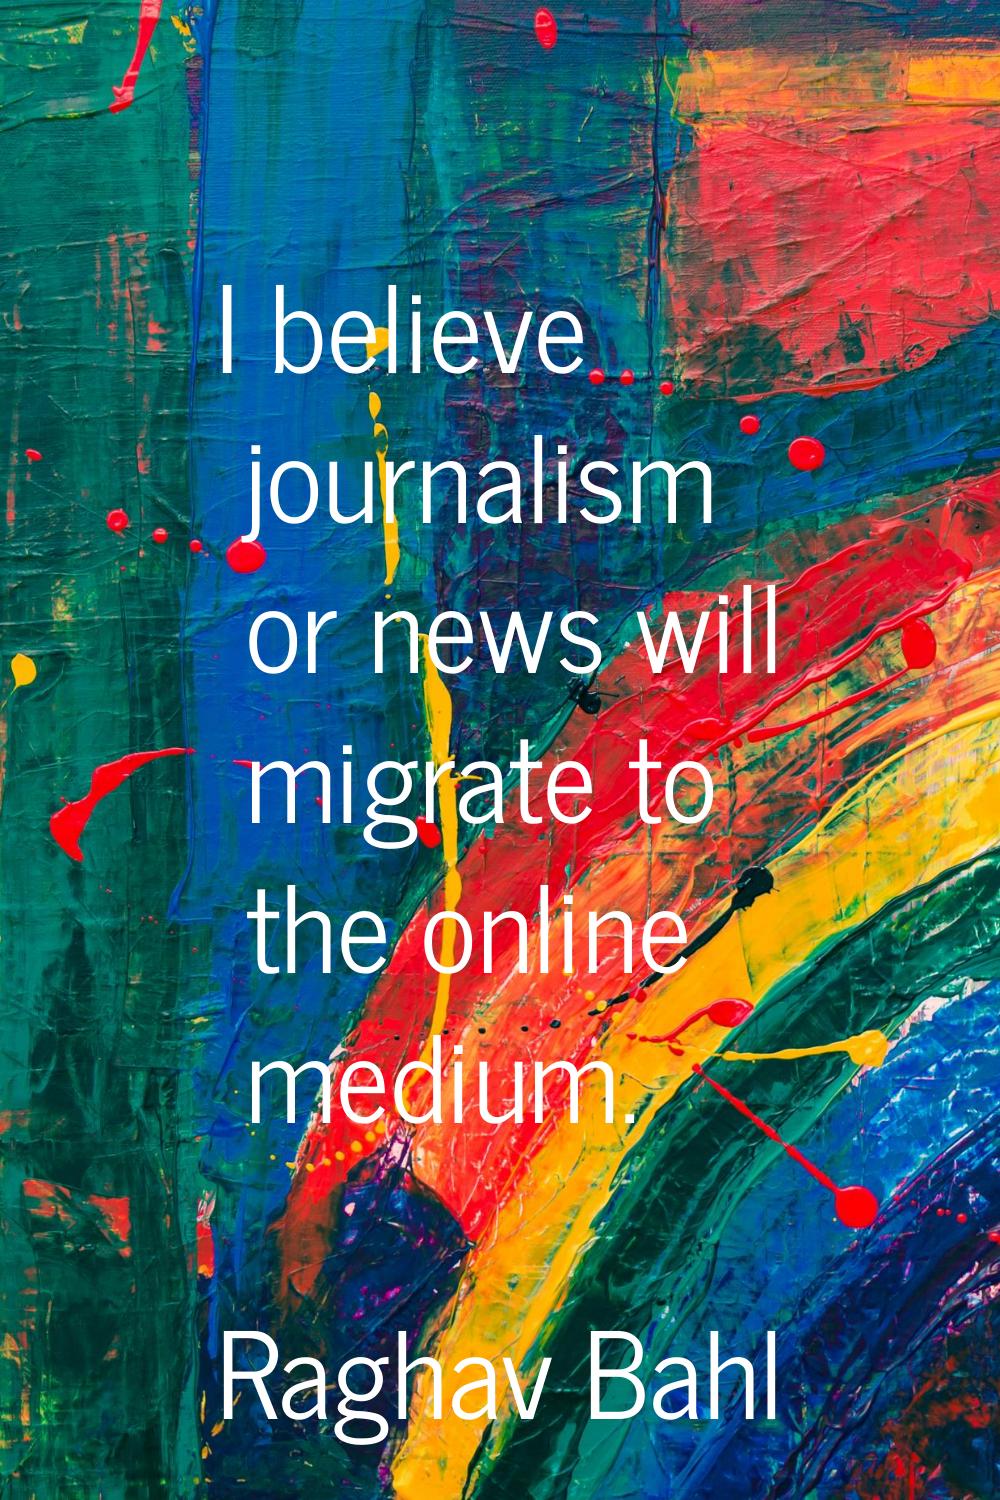 I believe journalism or news will migrate to the online medium.